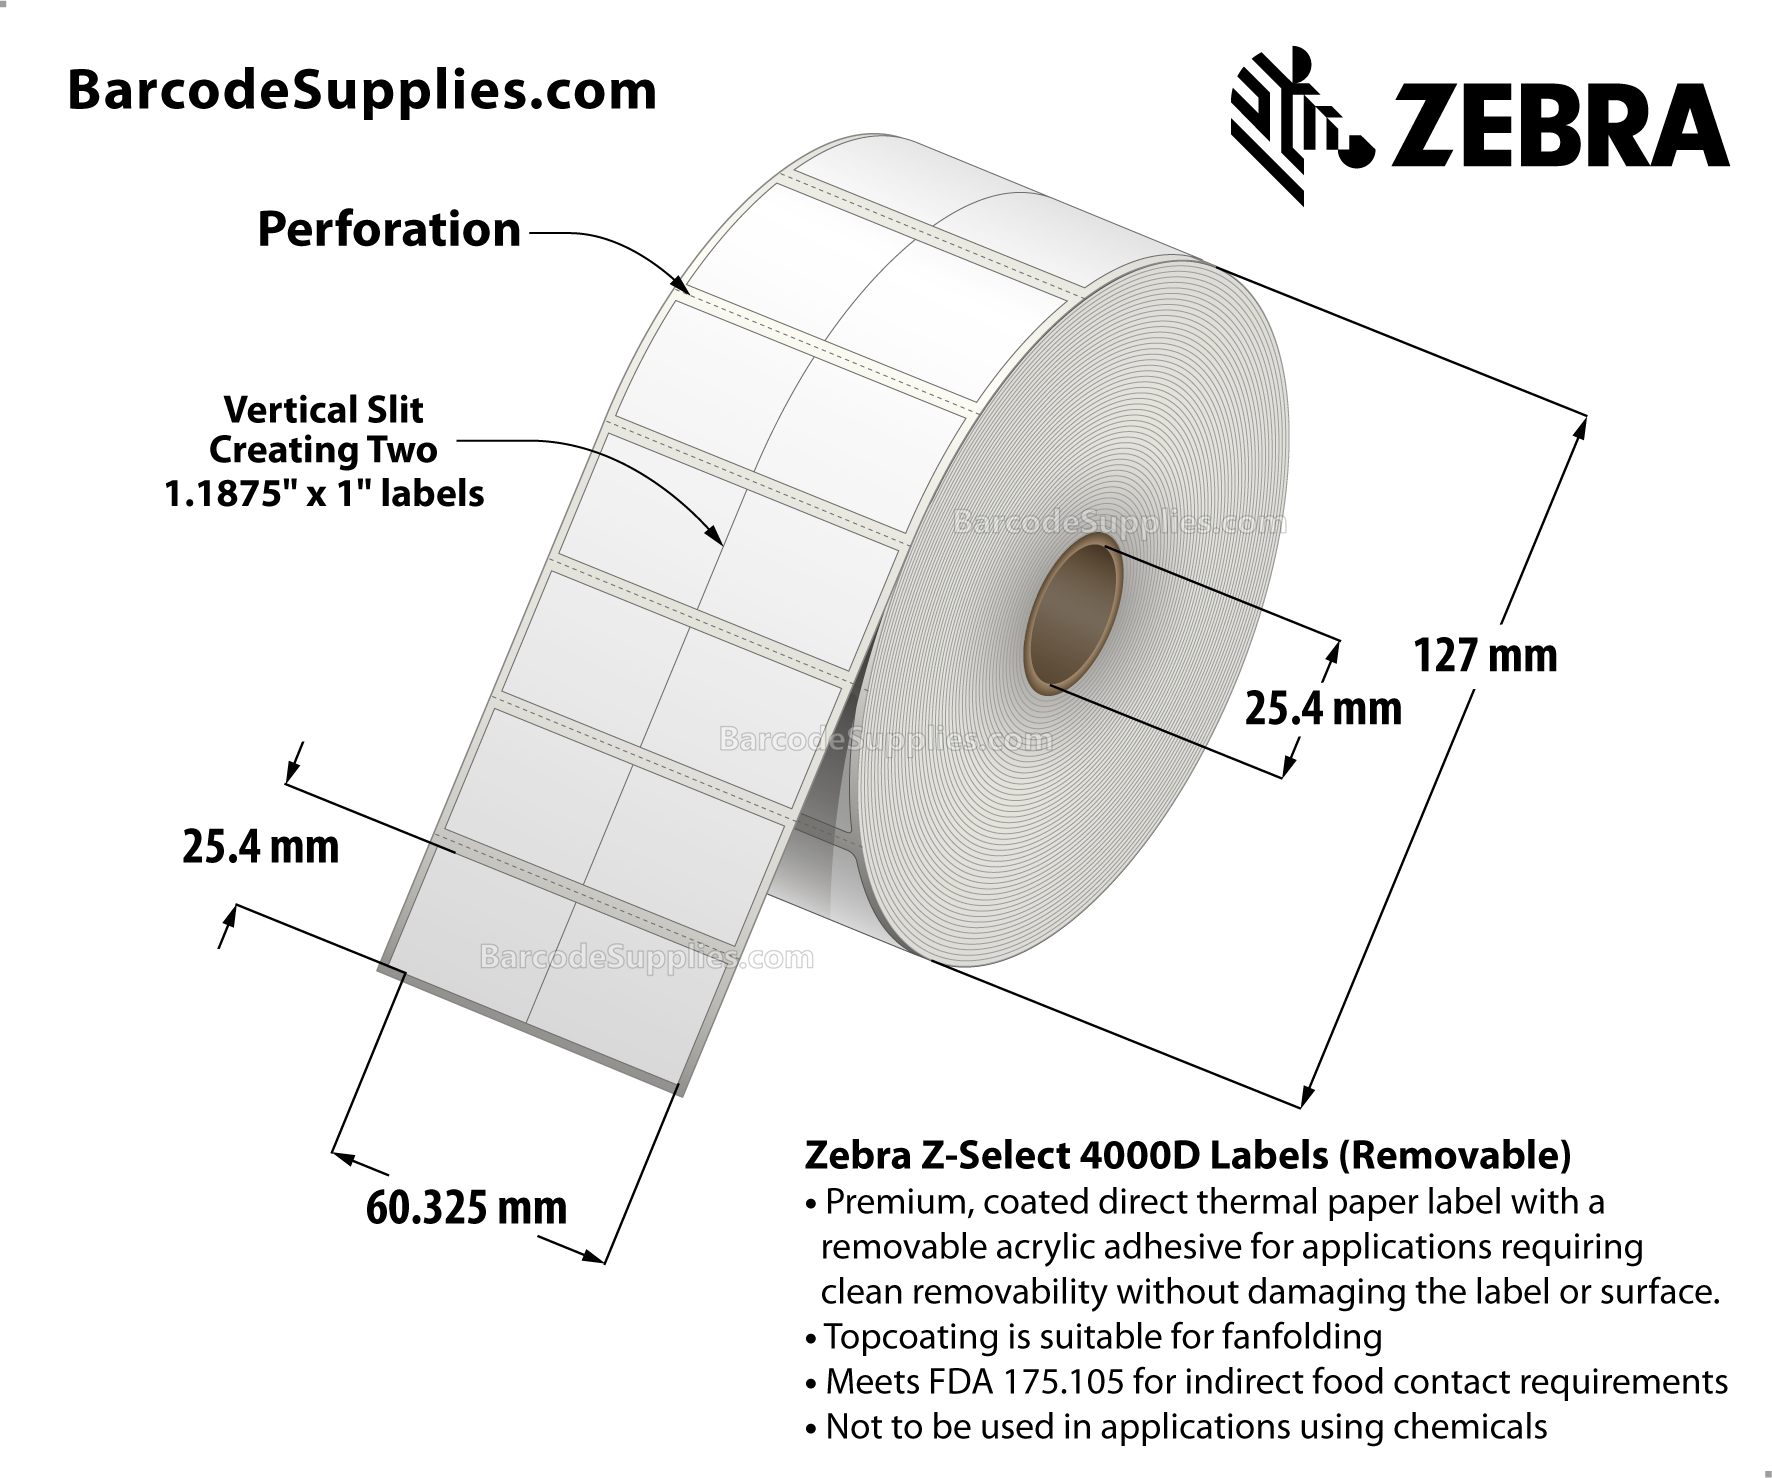 2.375 x 1 Direct Thermal White Z-Select 4000D Removable Labels With Removable Adhesive - Center vertical slit creating two 1.1875" x 1" labels - Perforated - 2260 Labels Per Roll - Carton Of 6 Rolls - 13560 Labels Total - MPN: 10010052